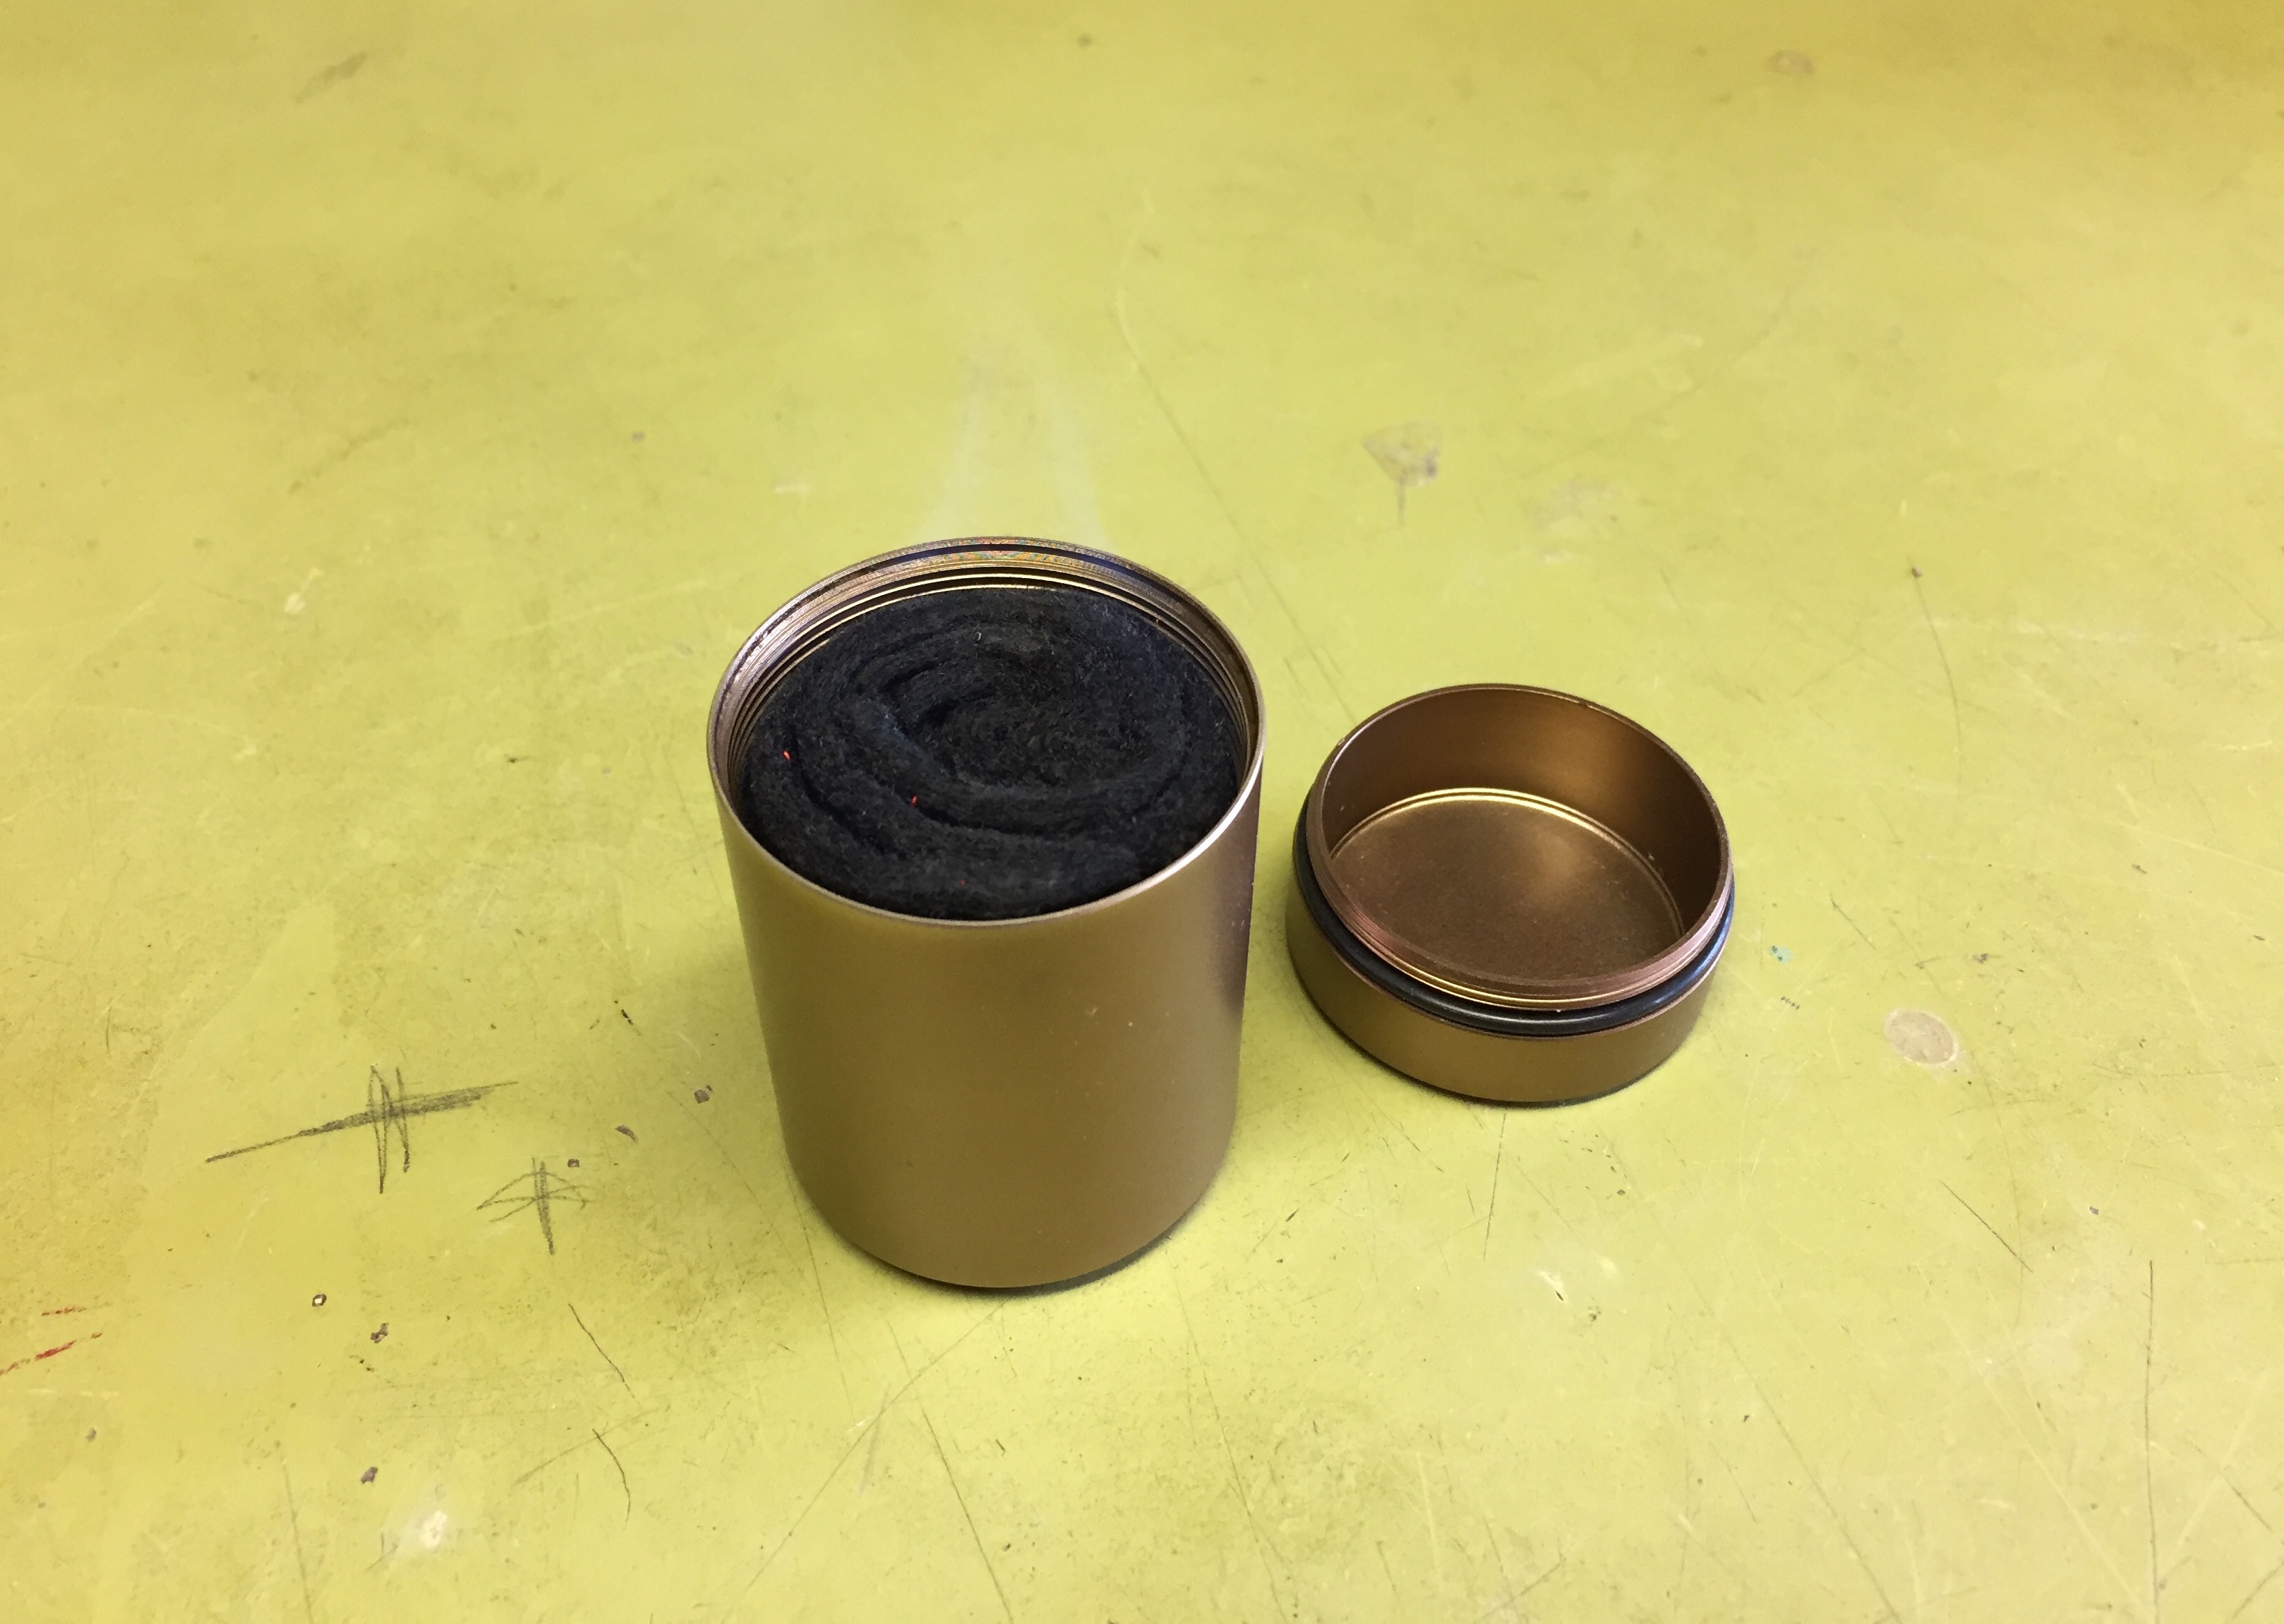 Sealable Alcohol Stove